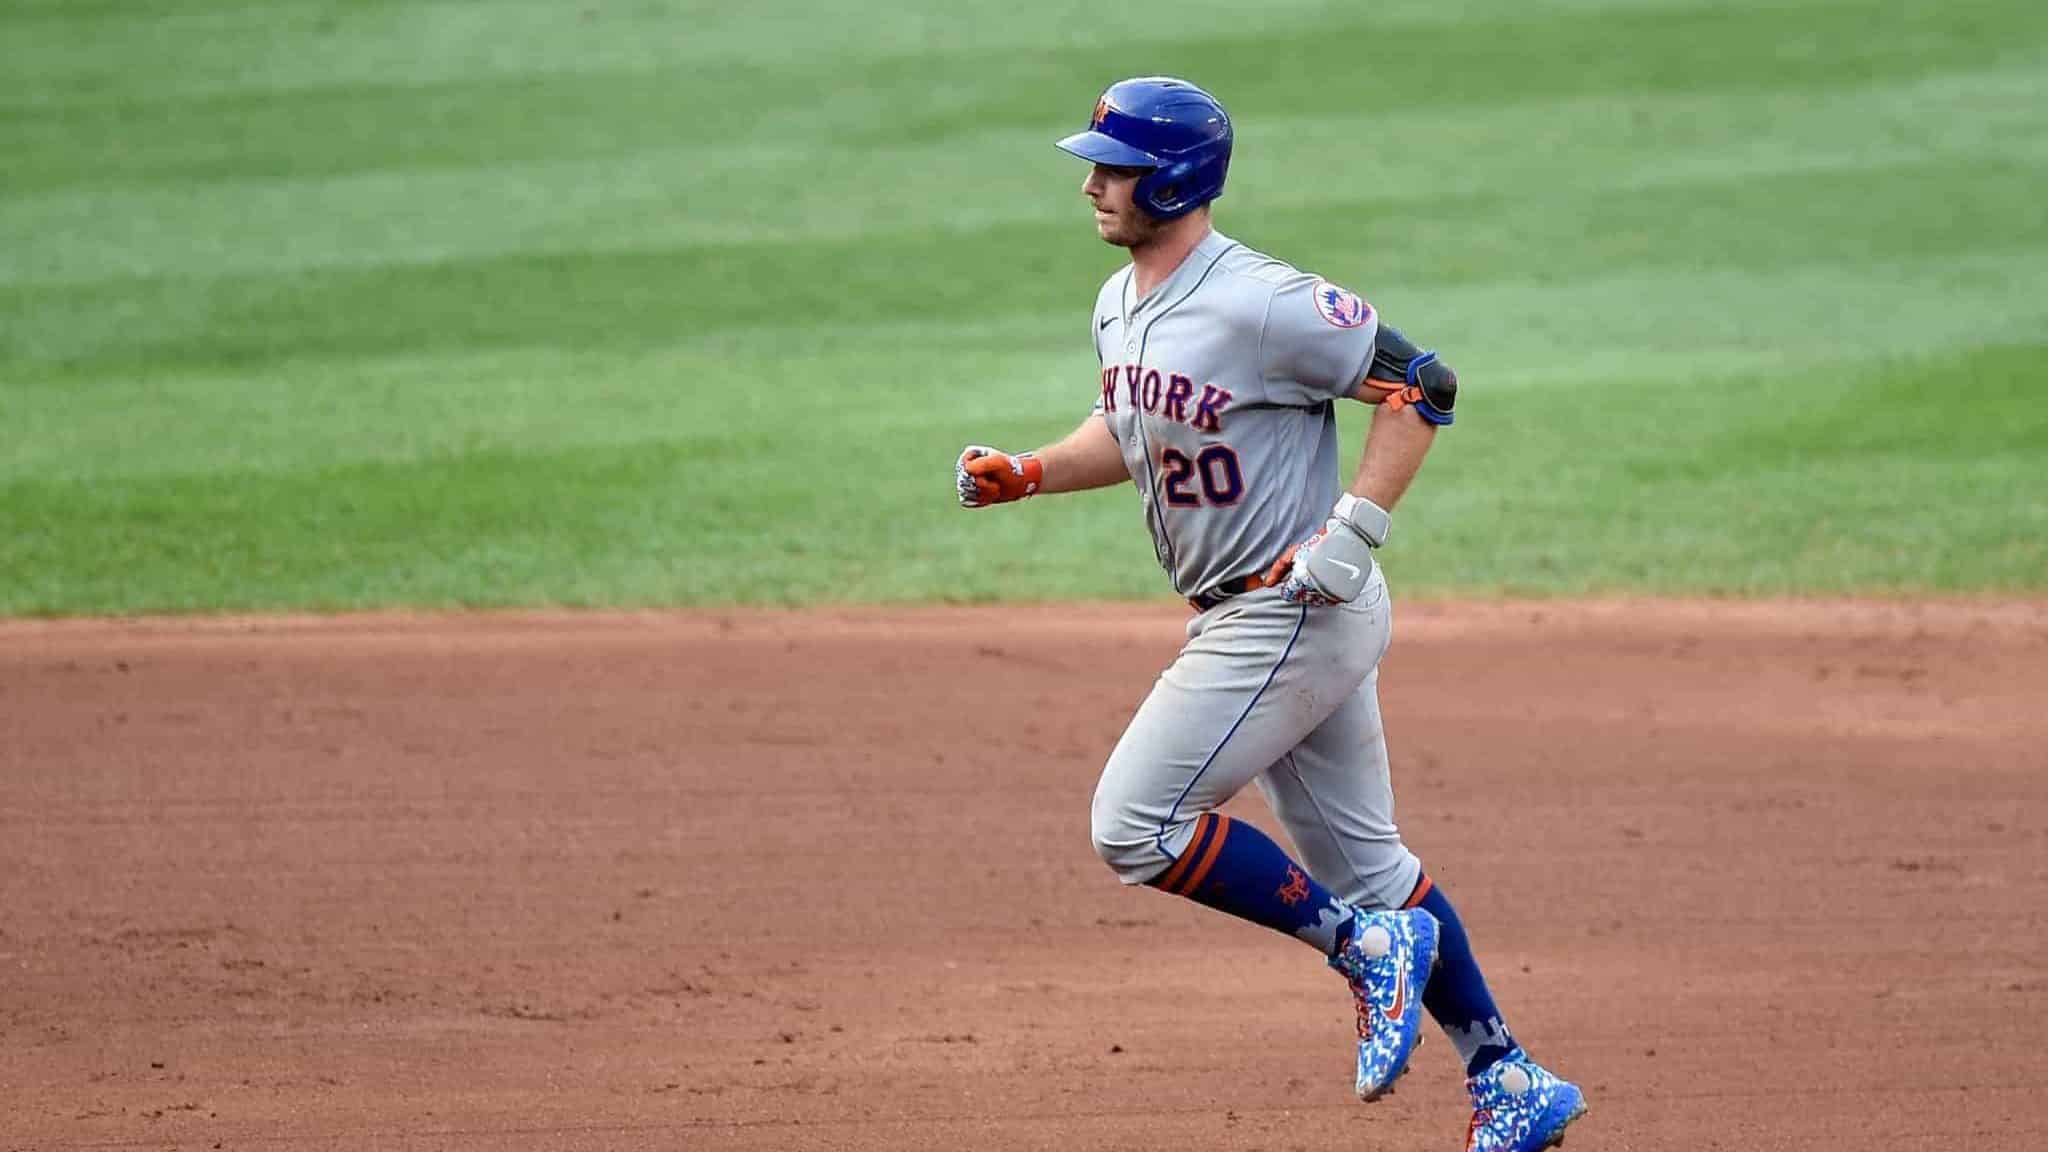 BALTIMORE, MD - SEPTEMBER 02: Pete Alonso #20 of the New York Mets rounds the bases after hitting a home run in the sixth inning against the Baltimore Orioles at Oriole Park at Camden Yards on September 2, 2020 in Baltimore, Maryland.